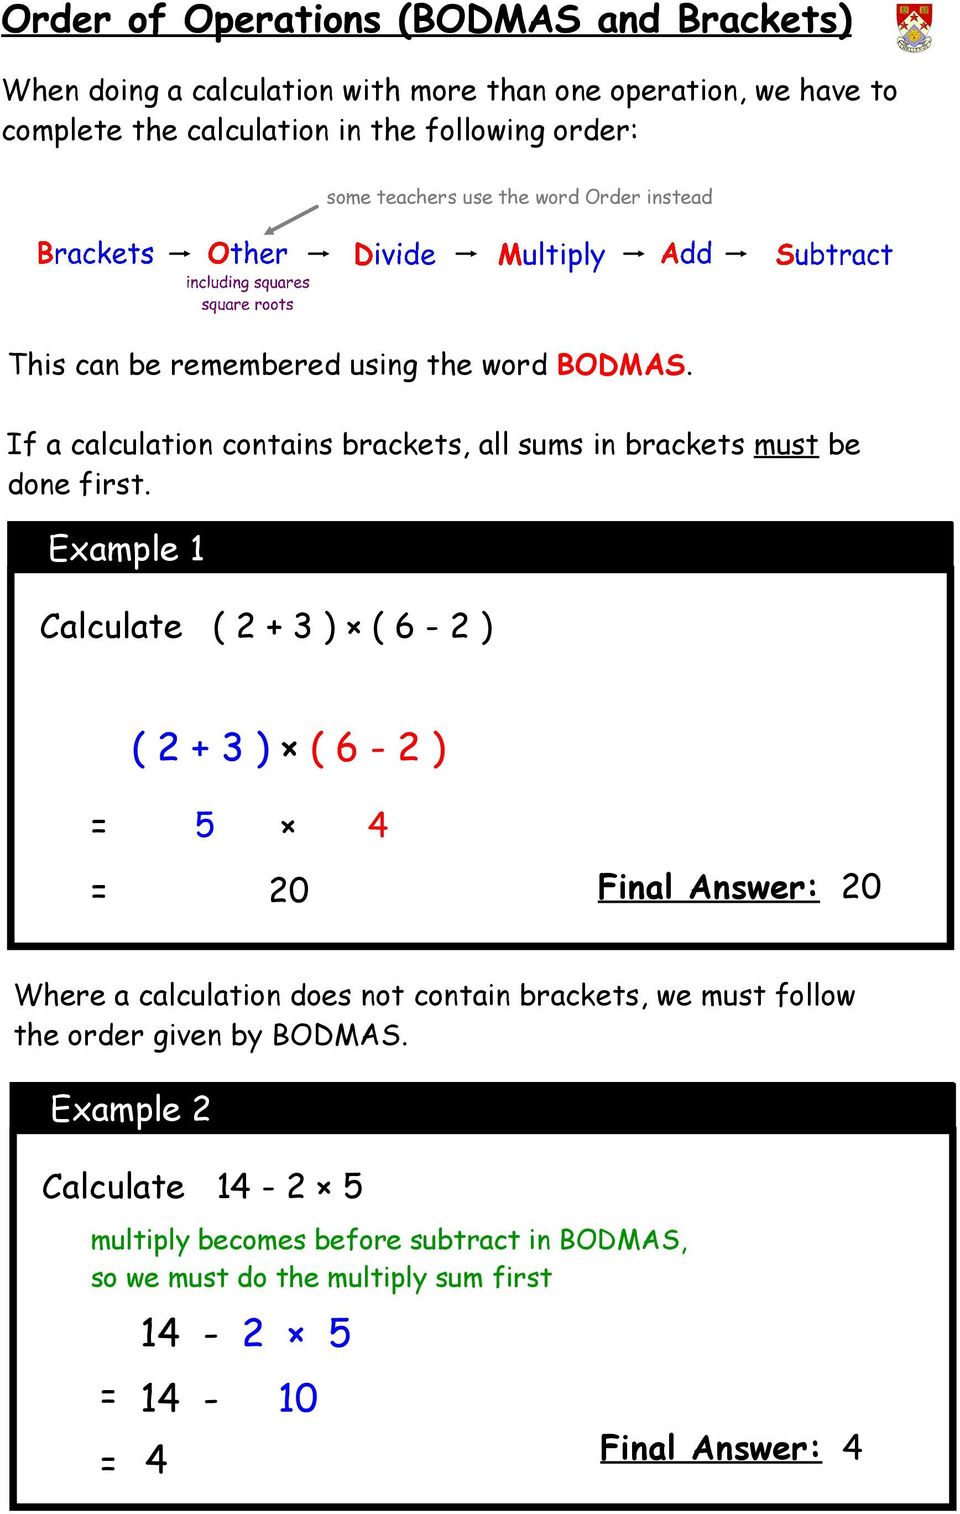 If a calculation contains brackets, all sums in brackets must be done first.